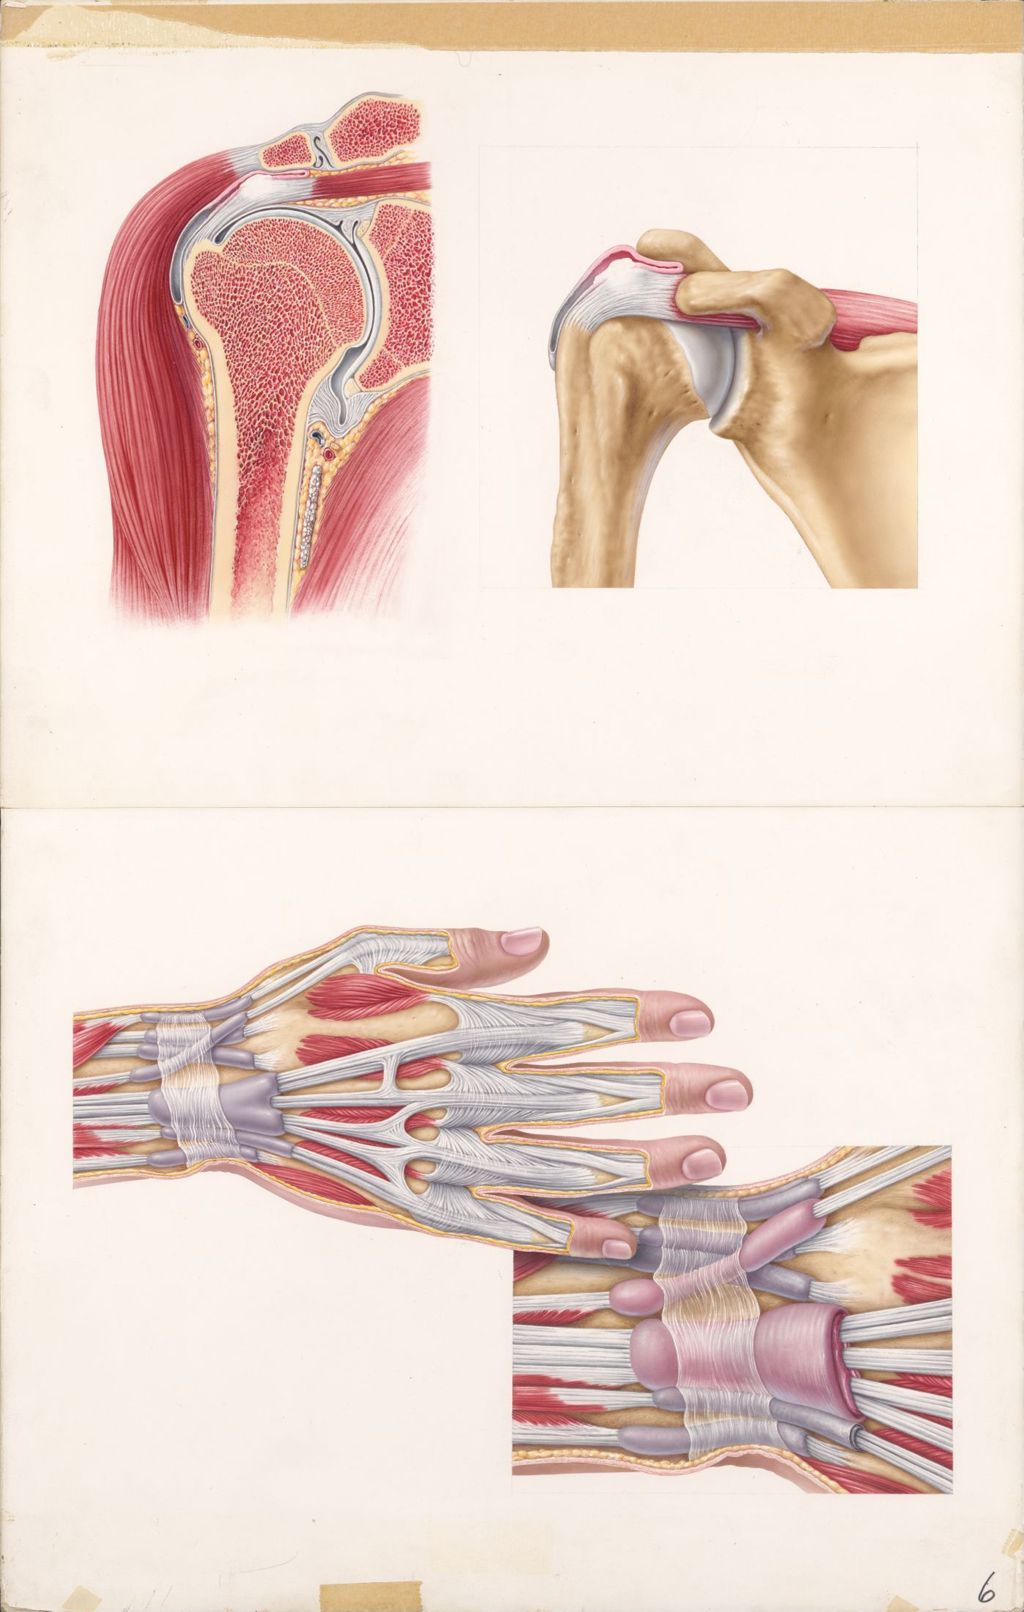 Miniature of Medical Profiles, Decadron with Xylocaine, Sites and appearances of some musculoskeletal disorders